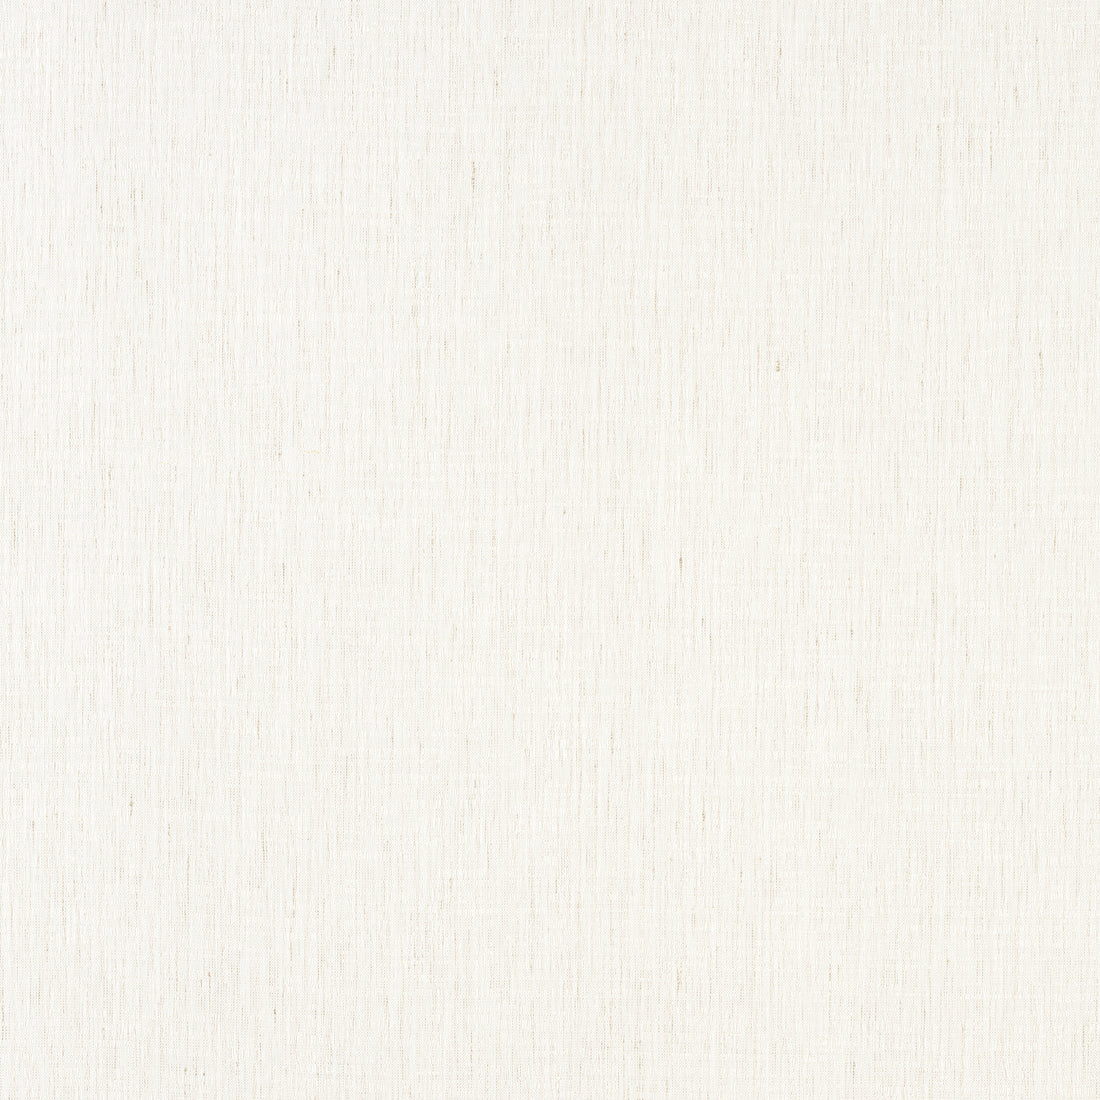 Sandhurst fabric in linen color - pattern number FWW7138 - by Thibaut in the Atmosphere collection